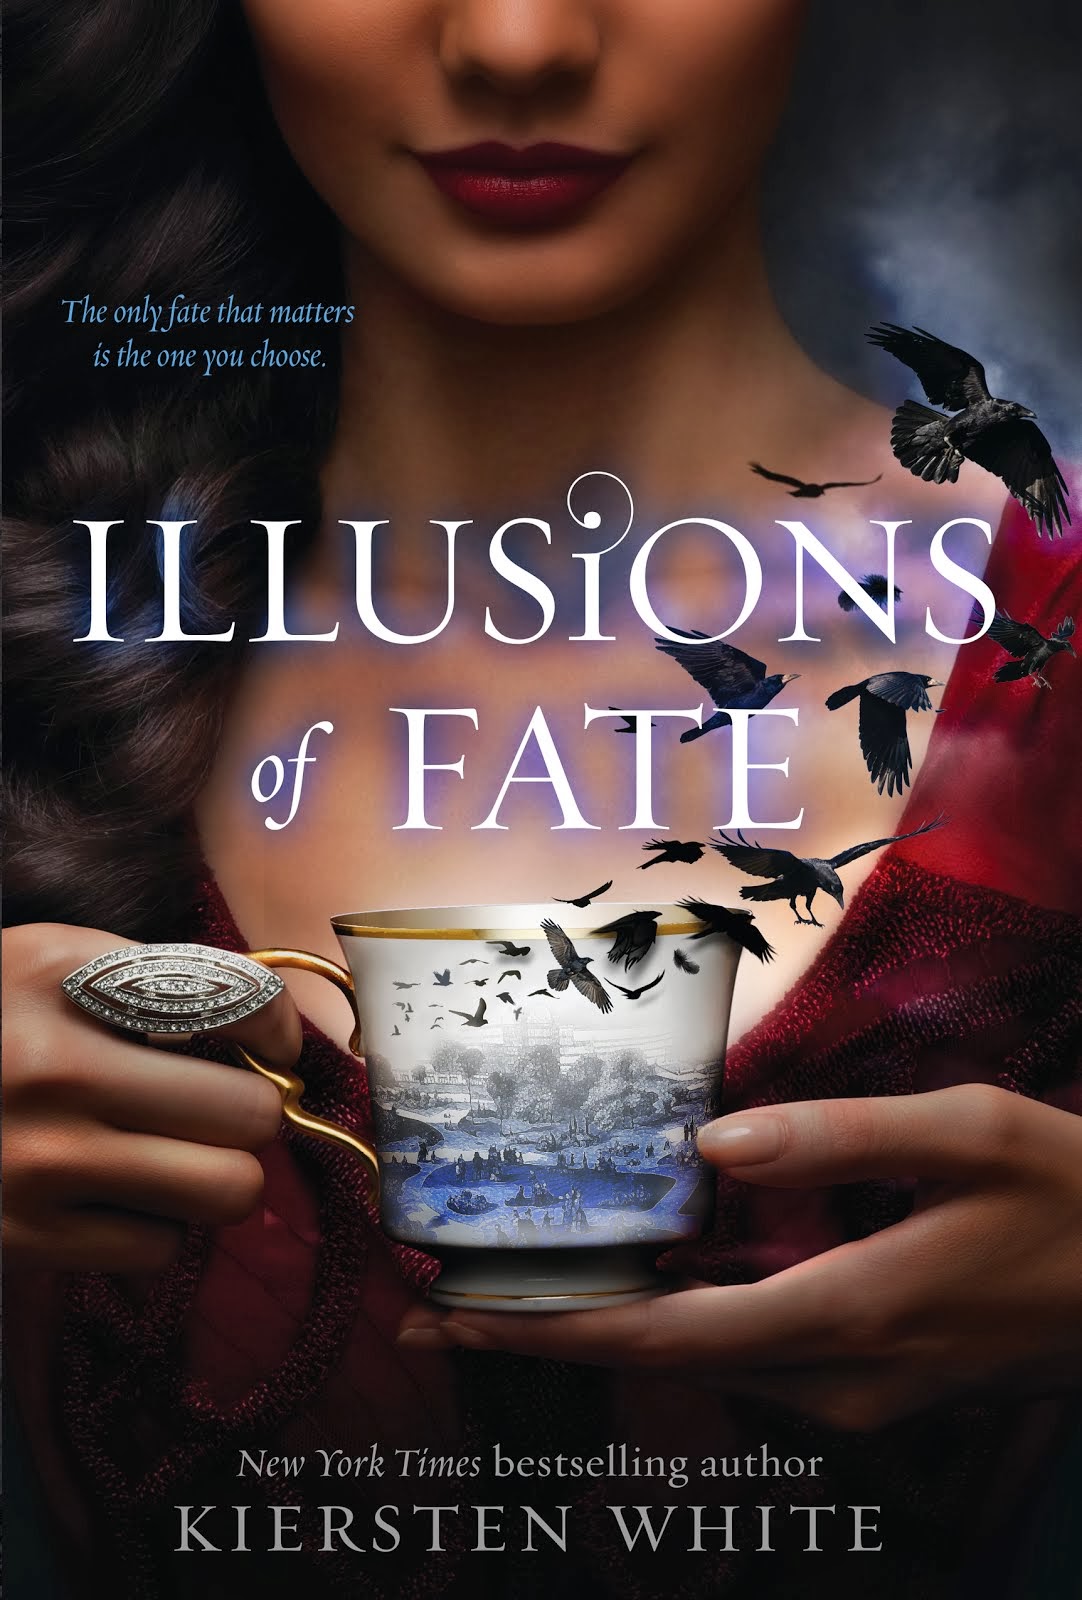 ILLUSIONS OF FATE